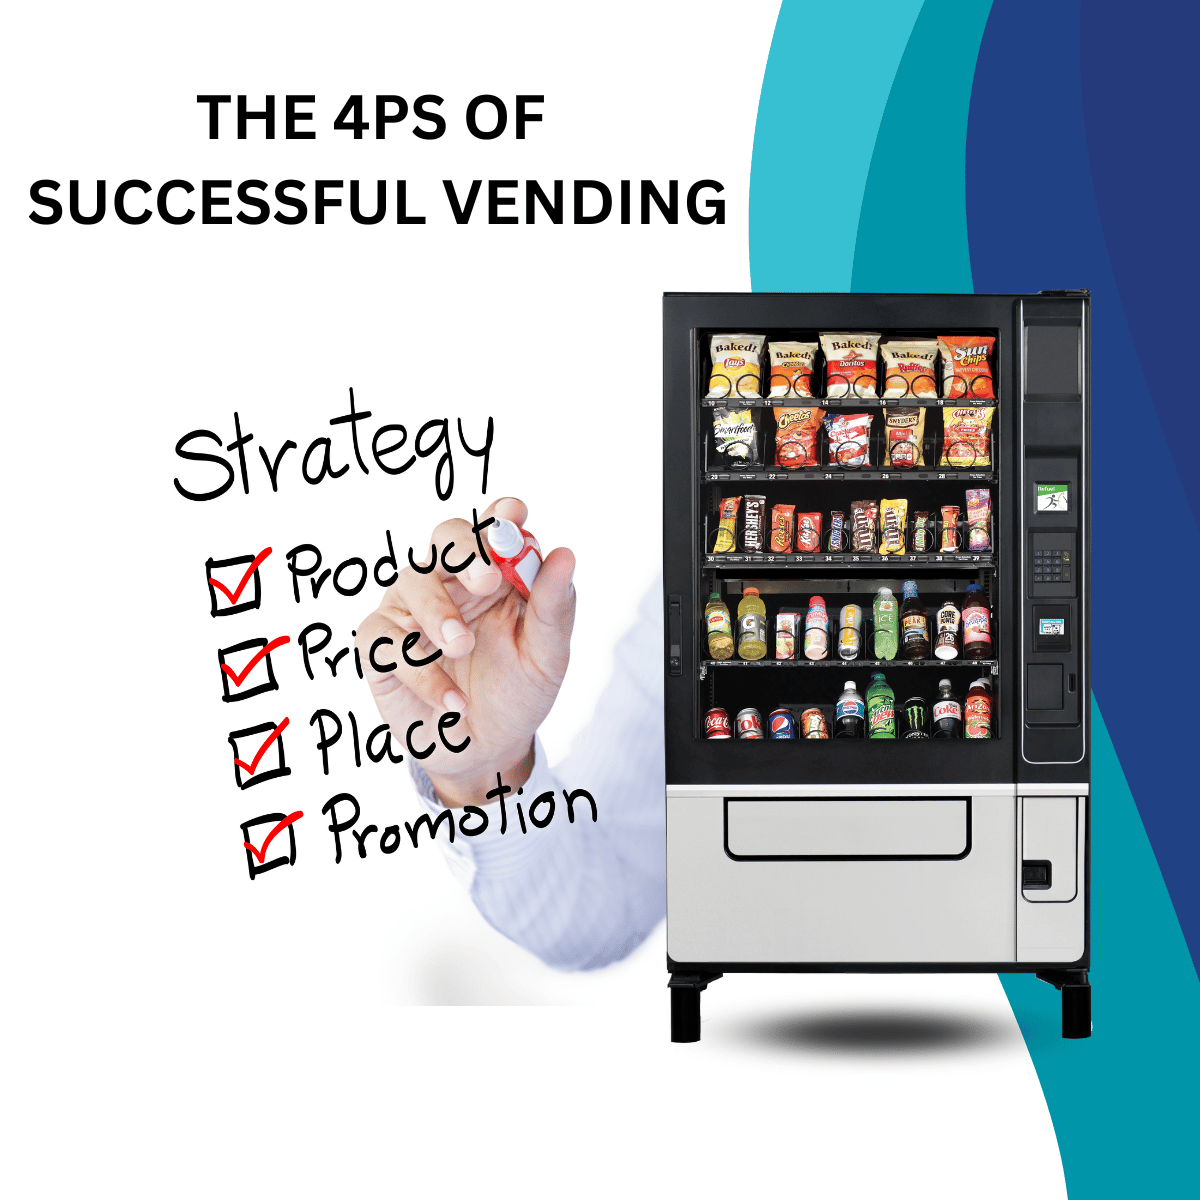 THE 4PS OF SUCCESSFUL VENDING